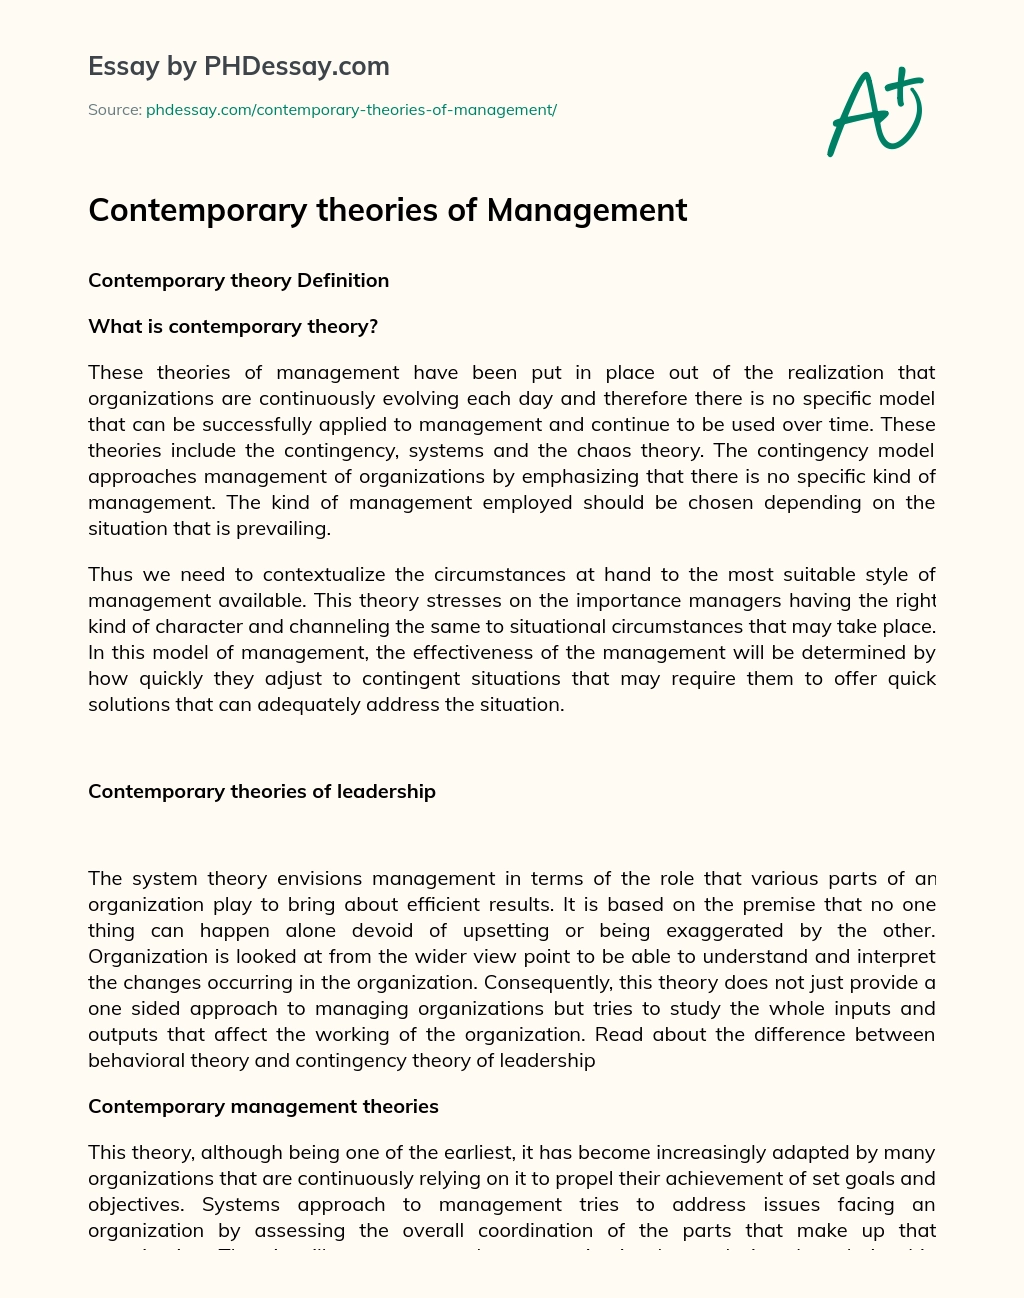 Contemporary theories of Management essay